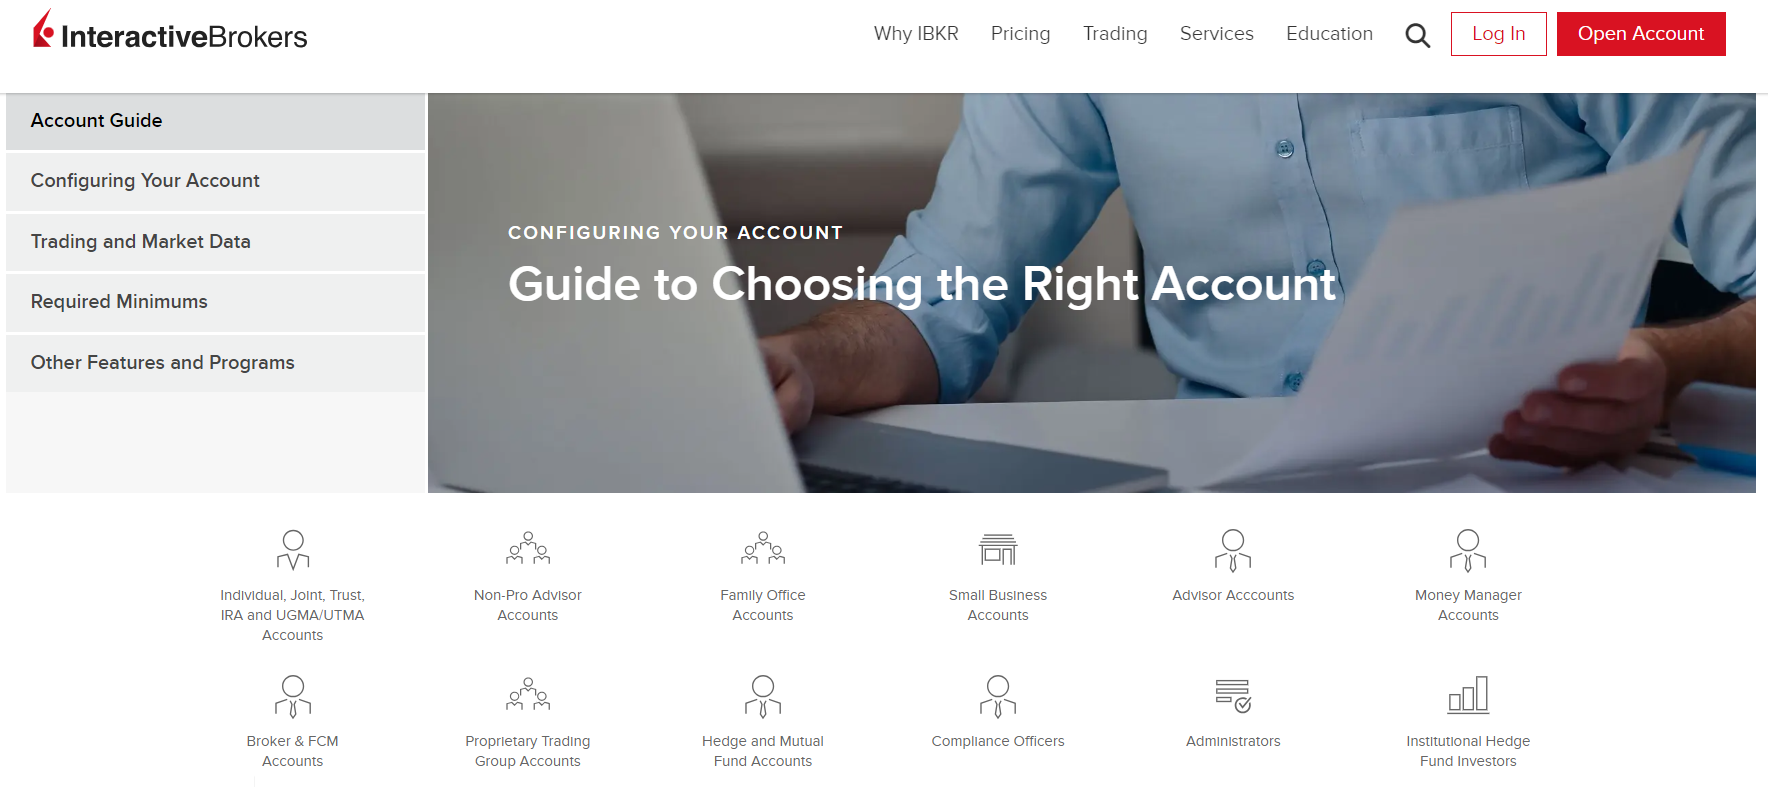 Account Guide at Interactive Brokers